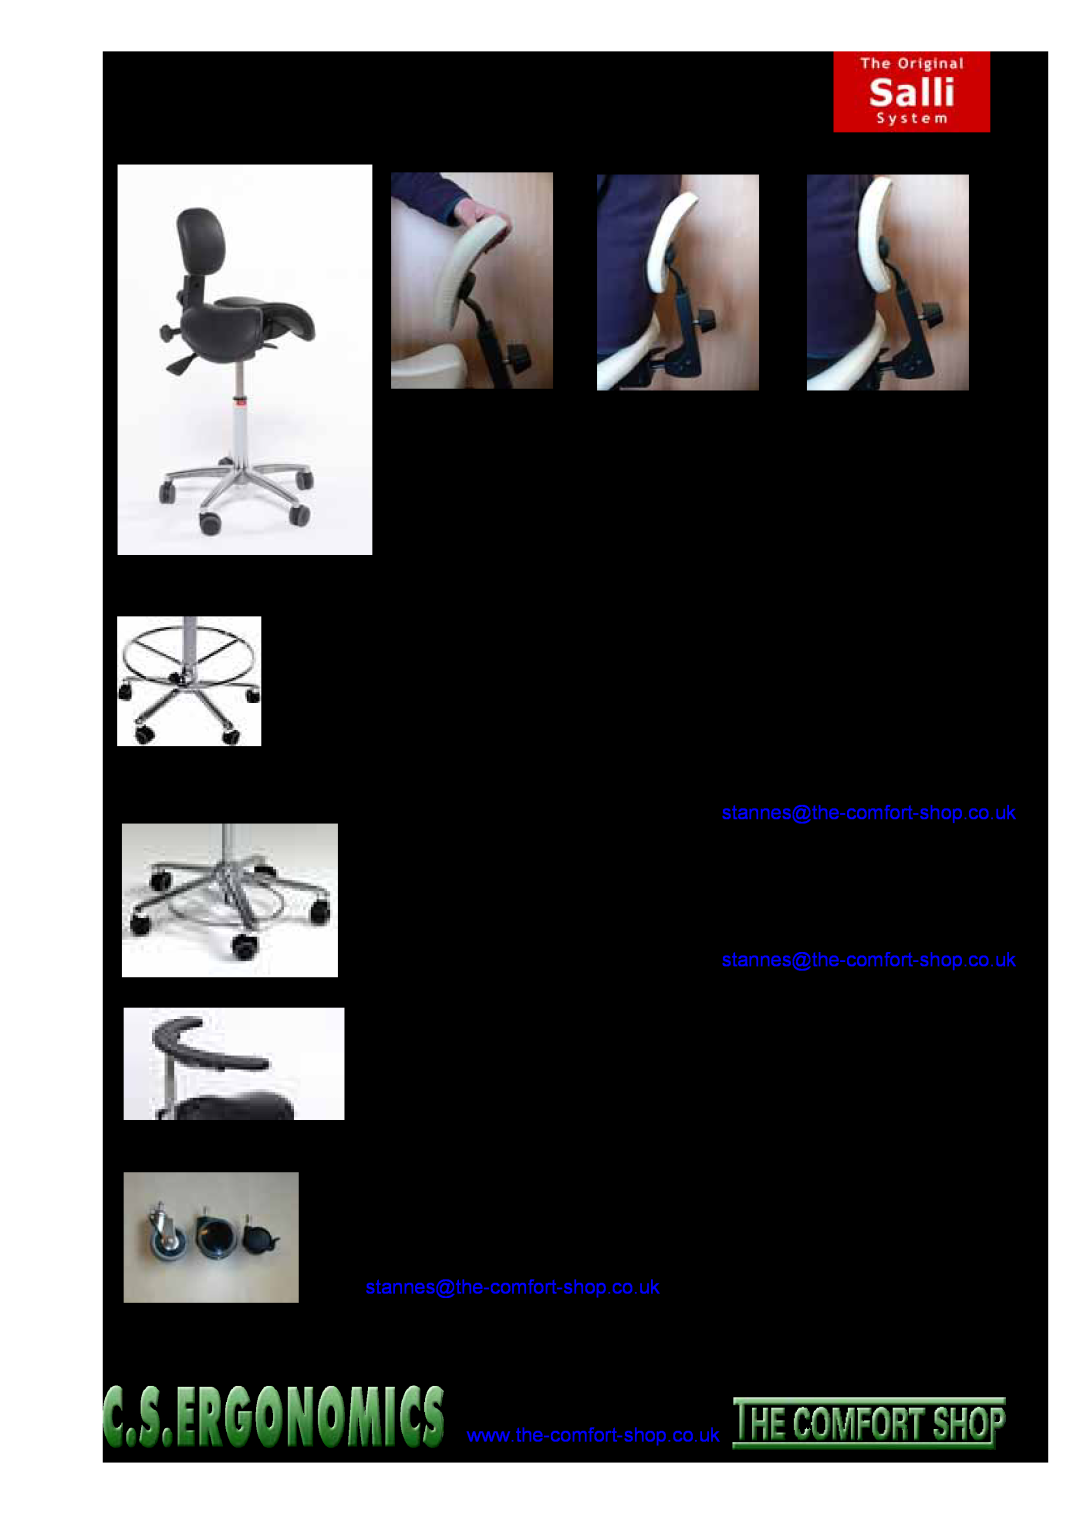 Fellowes RH 300 Accessories, Saddle Stools, A backrest in leather to match seat, £60 + VAT £70.50, £206.54 + VAT £242.68 